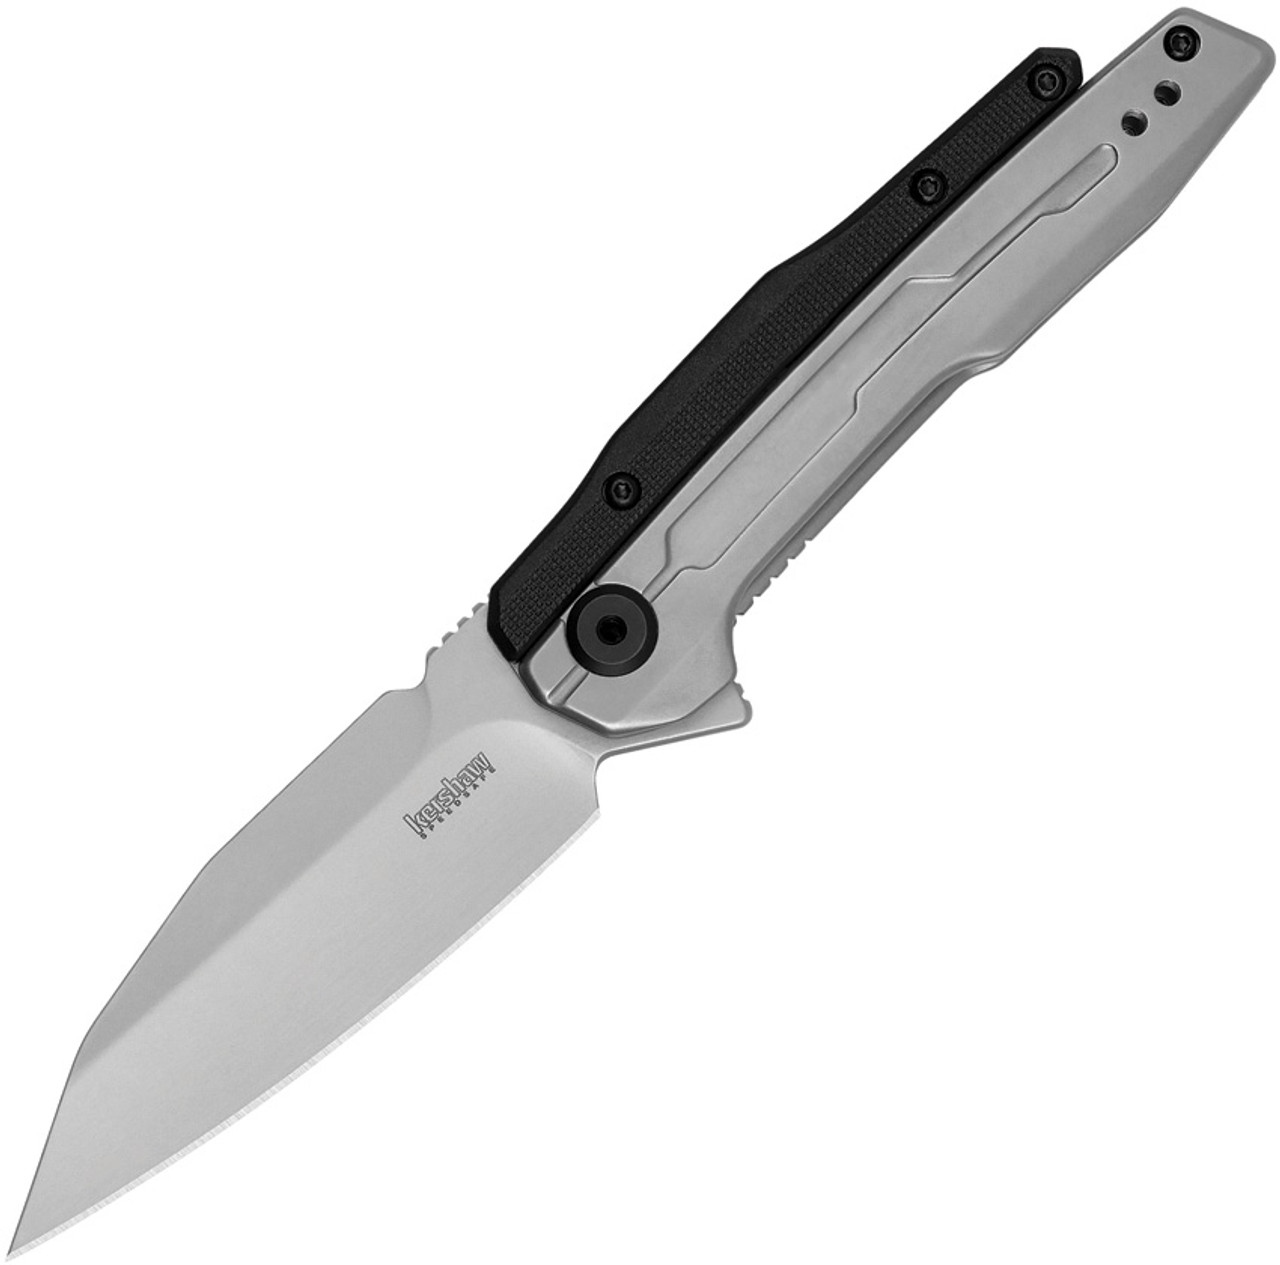 Kershaw Lithium Assisted Opening Knife (2049)- 3.25" Stonewashed 8Cr13MoV Reverse Tanto Blade, Black and Silver GFN and Stainless Steel Handle